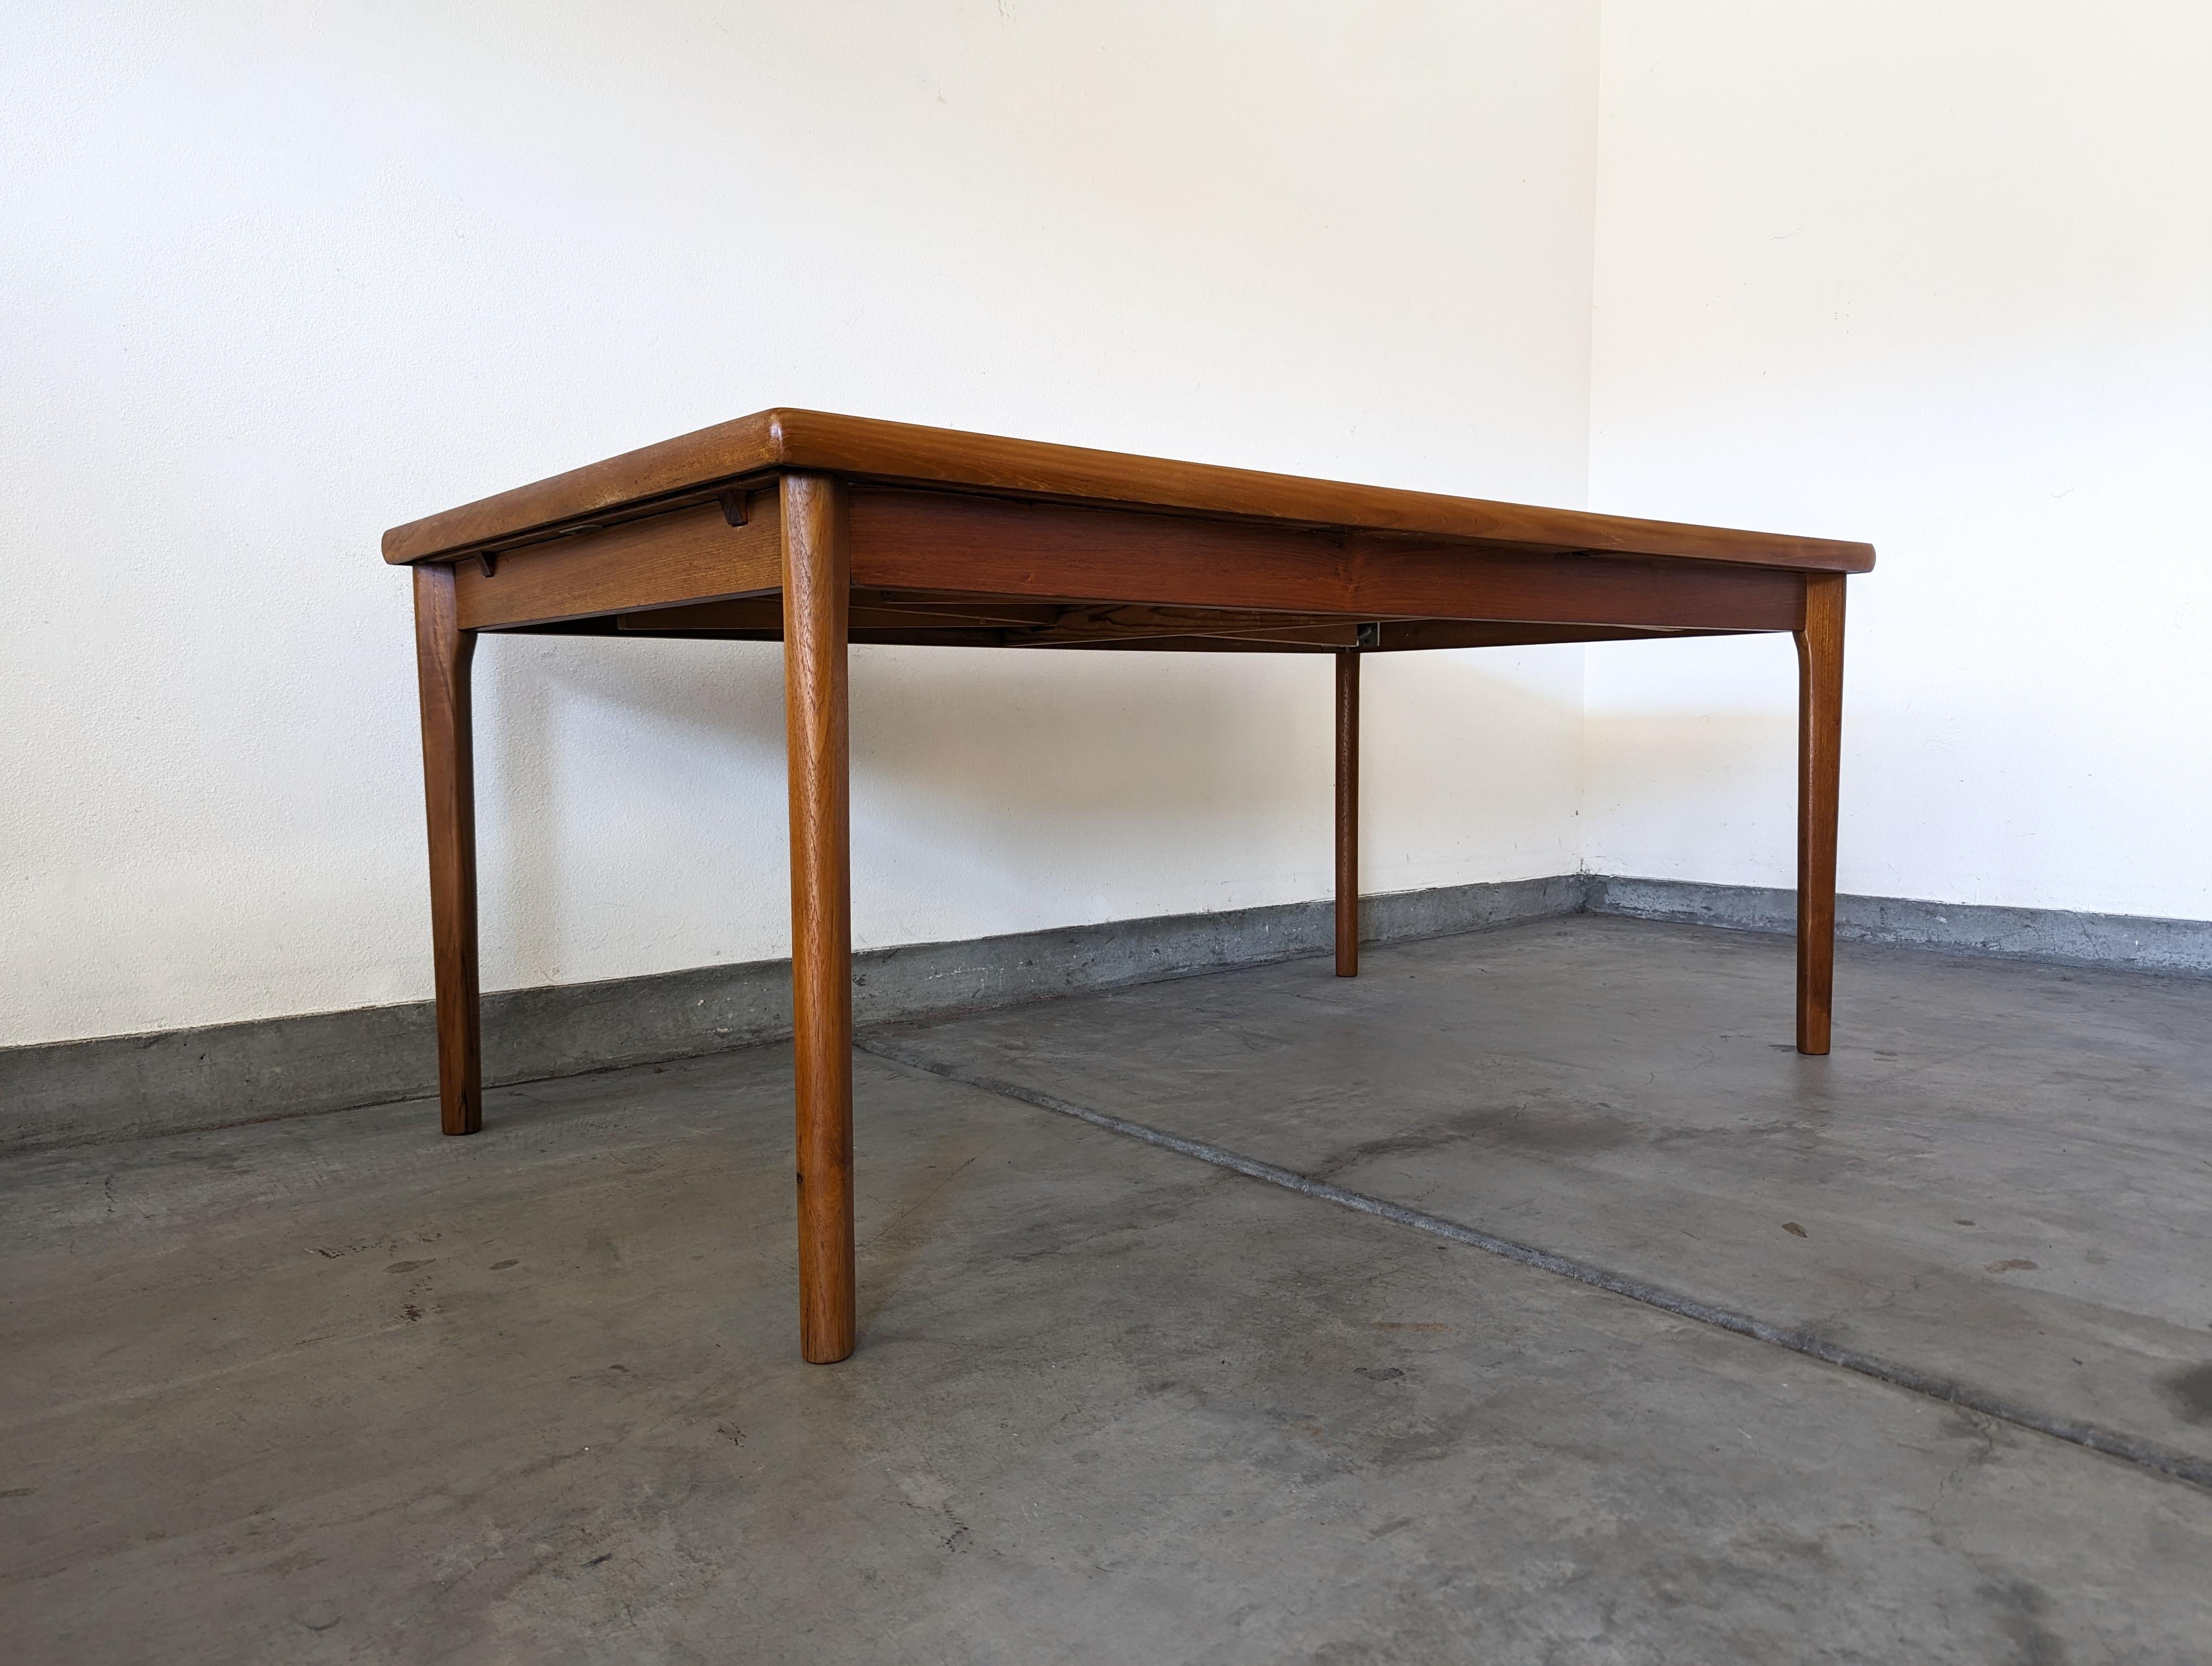 Danish Mid Century Modern Teak Extension Dining Table By Gudme, c1960s